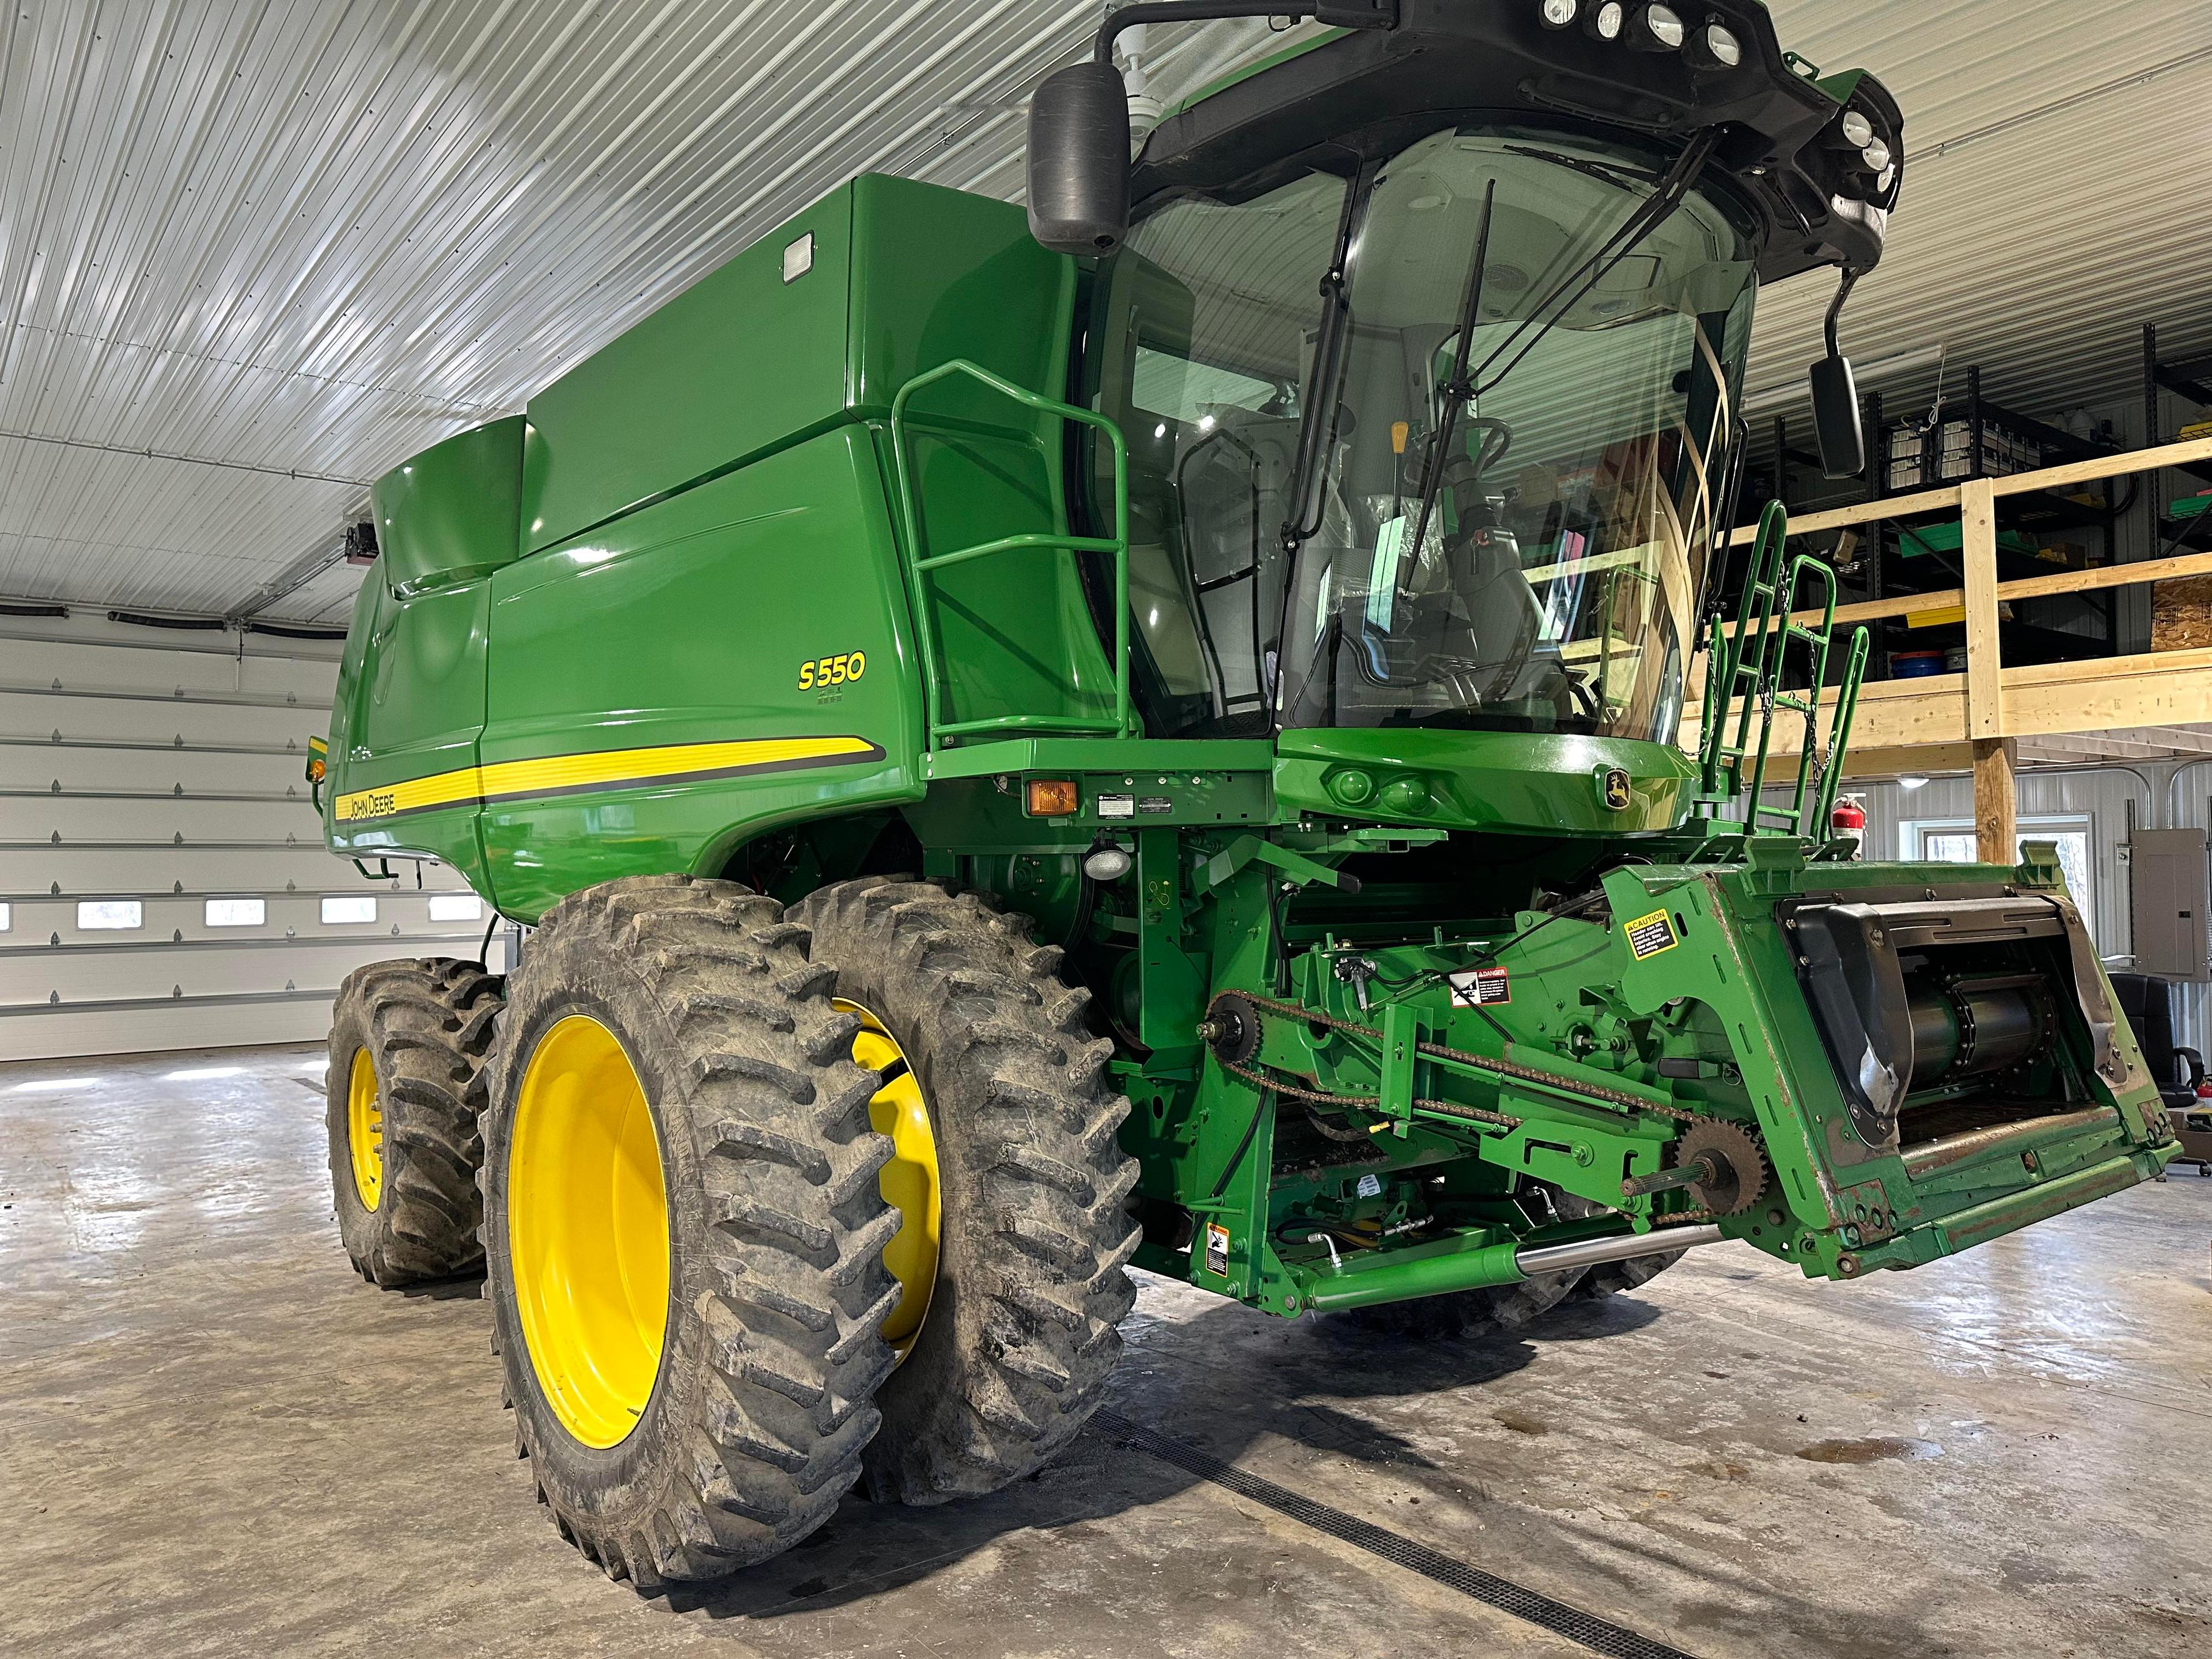 2013 John Deere S550 Combine With 991/588 One Owner Hours, 4 Wheel Drive, Contour Master, Deluxe Cab